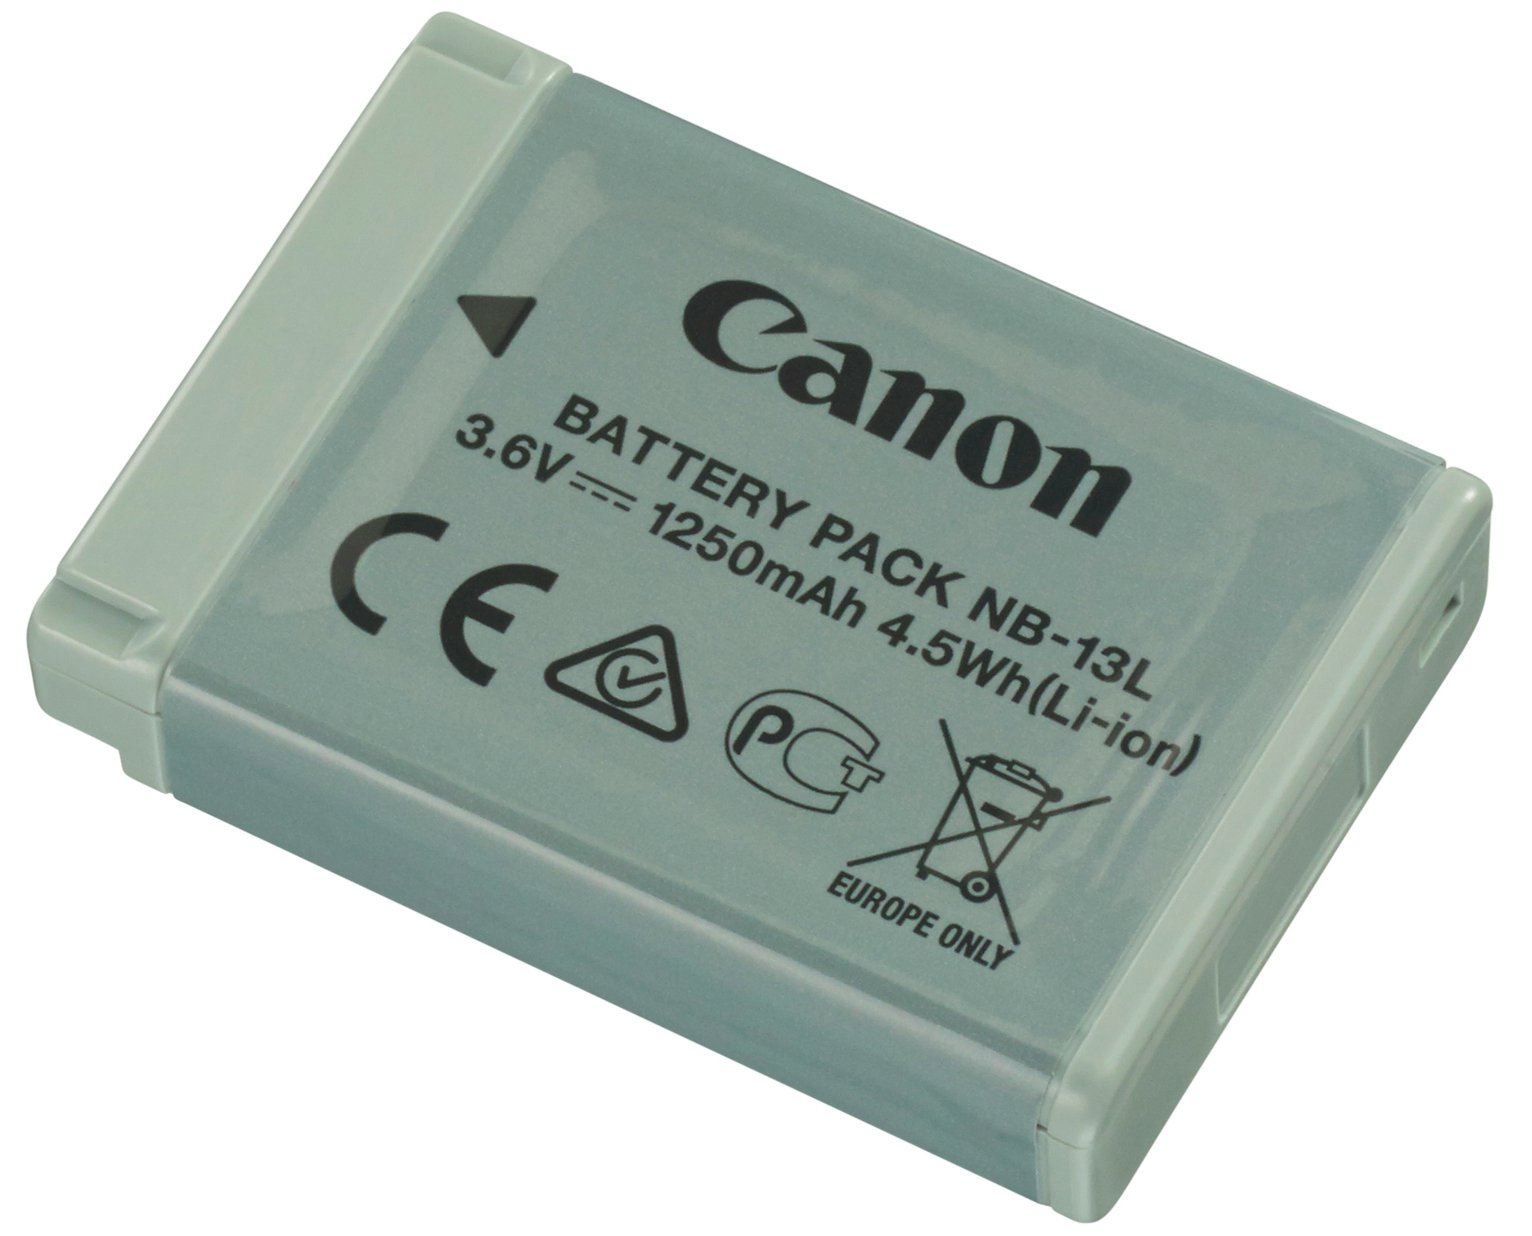 Canon NB 13L Battery Pack Review